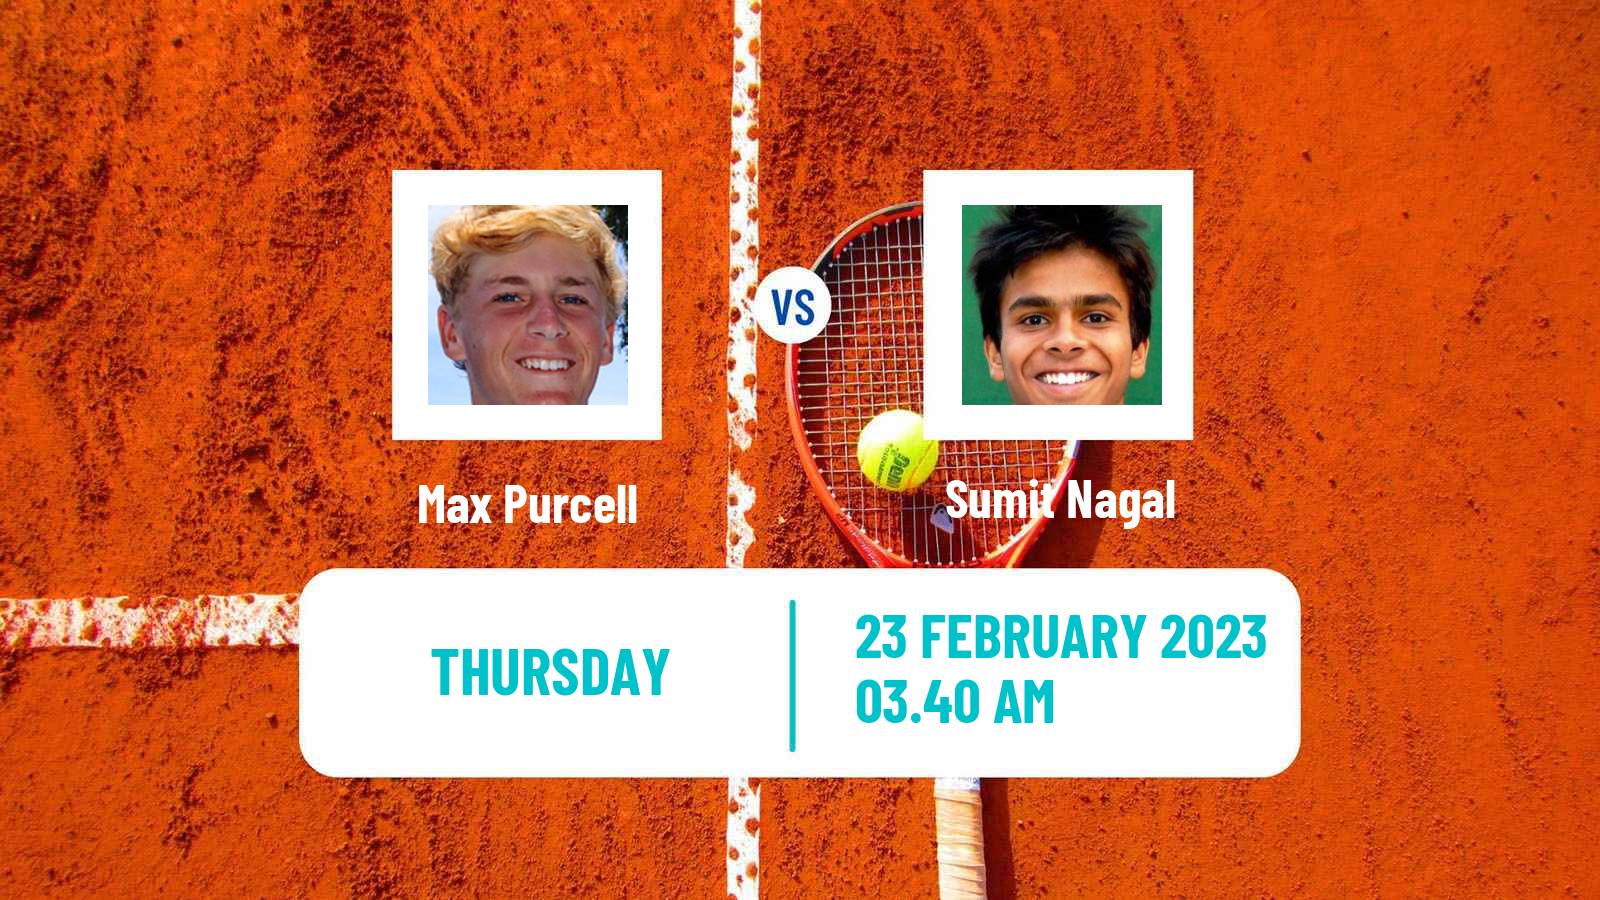 Tennis ATP Challenger Max Purcell - Sumit Nagal